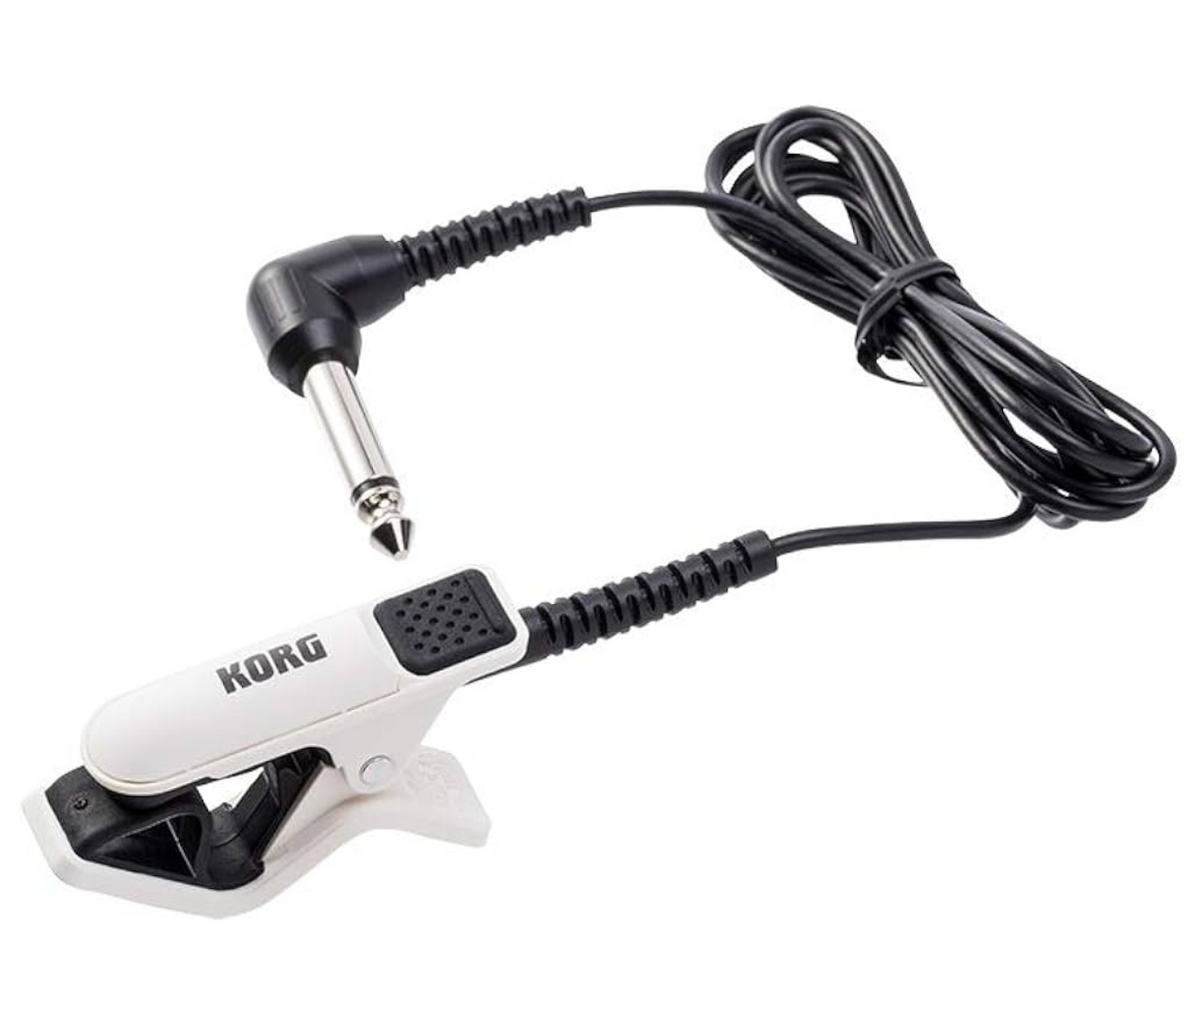 KORG CM-300-WHBK Best Contact Microphone Clip-type Mic for Stable Attachment to a Variety of Instruments with High-precision Tuning